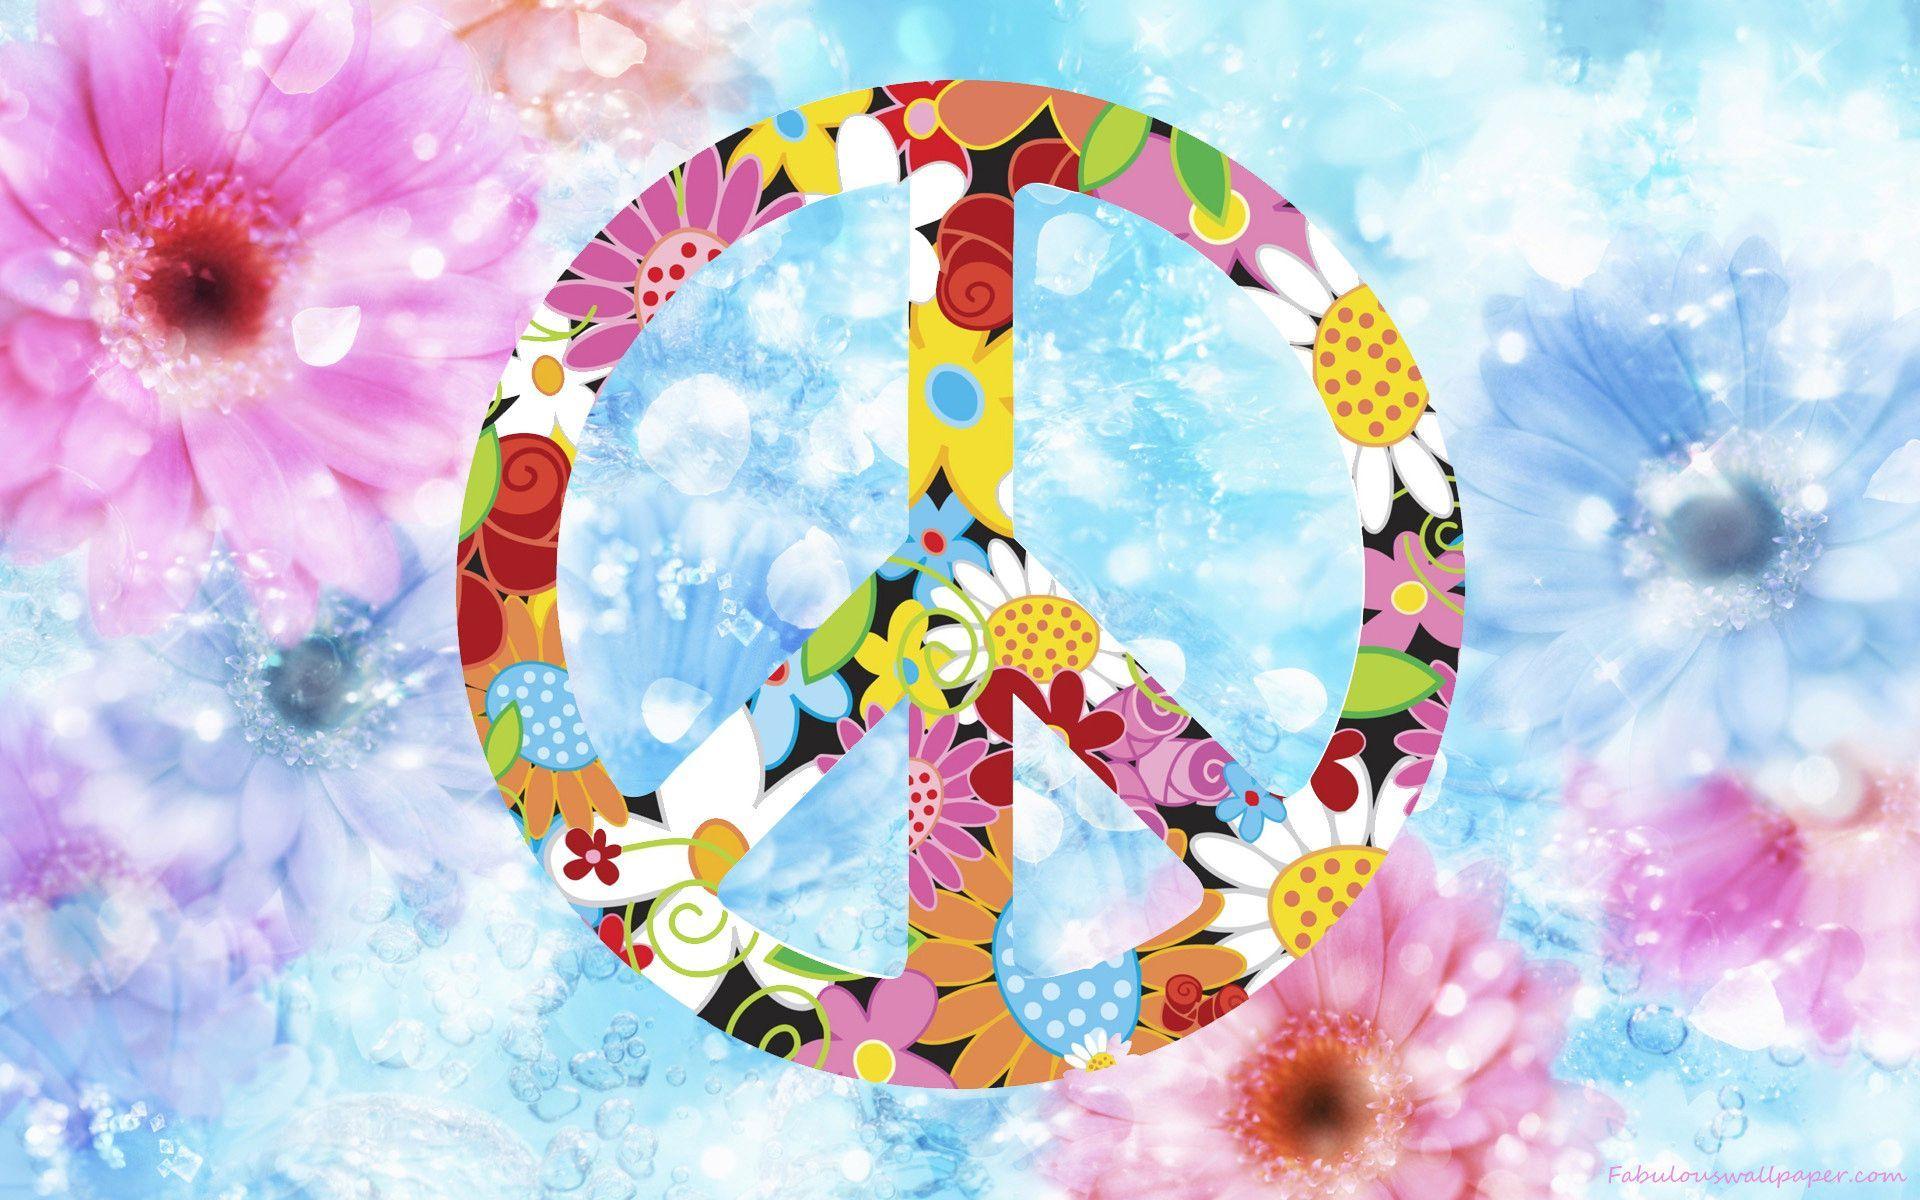 All Free Backgrounds of Peace Wallpapers